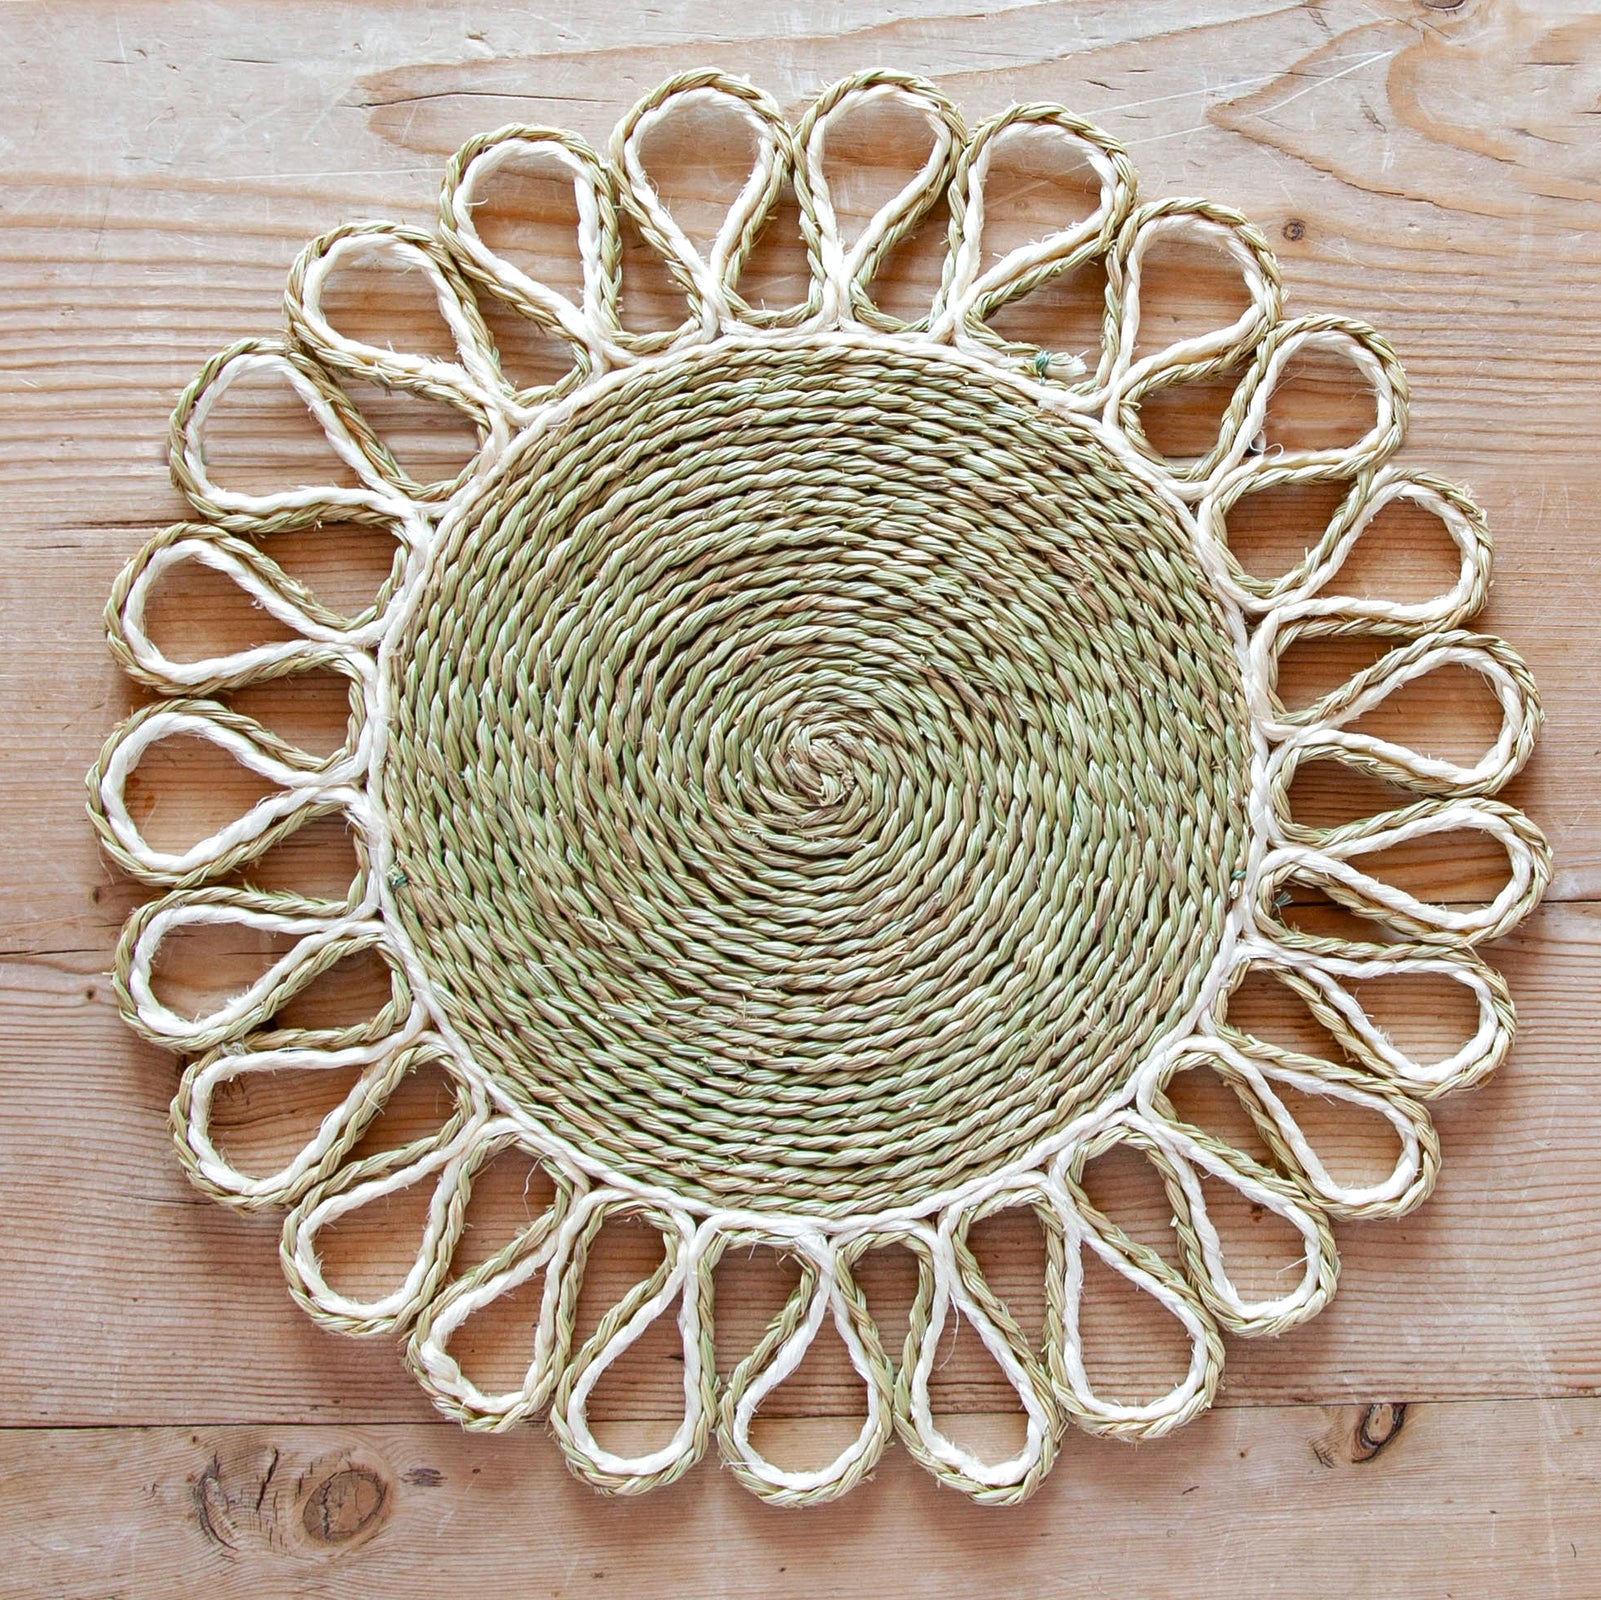 Looped sisal natural and white placemat 